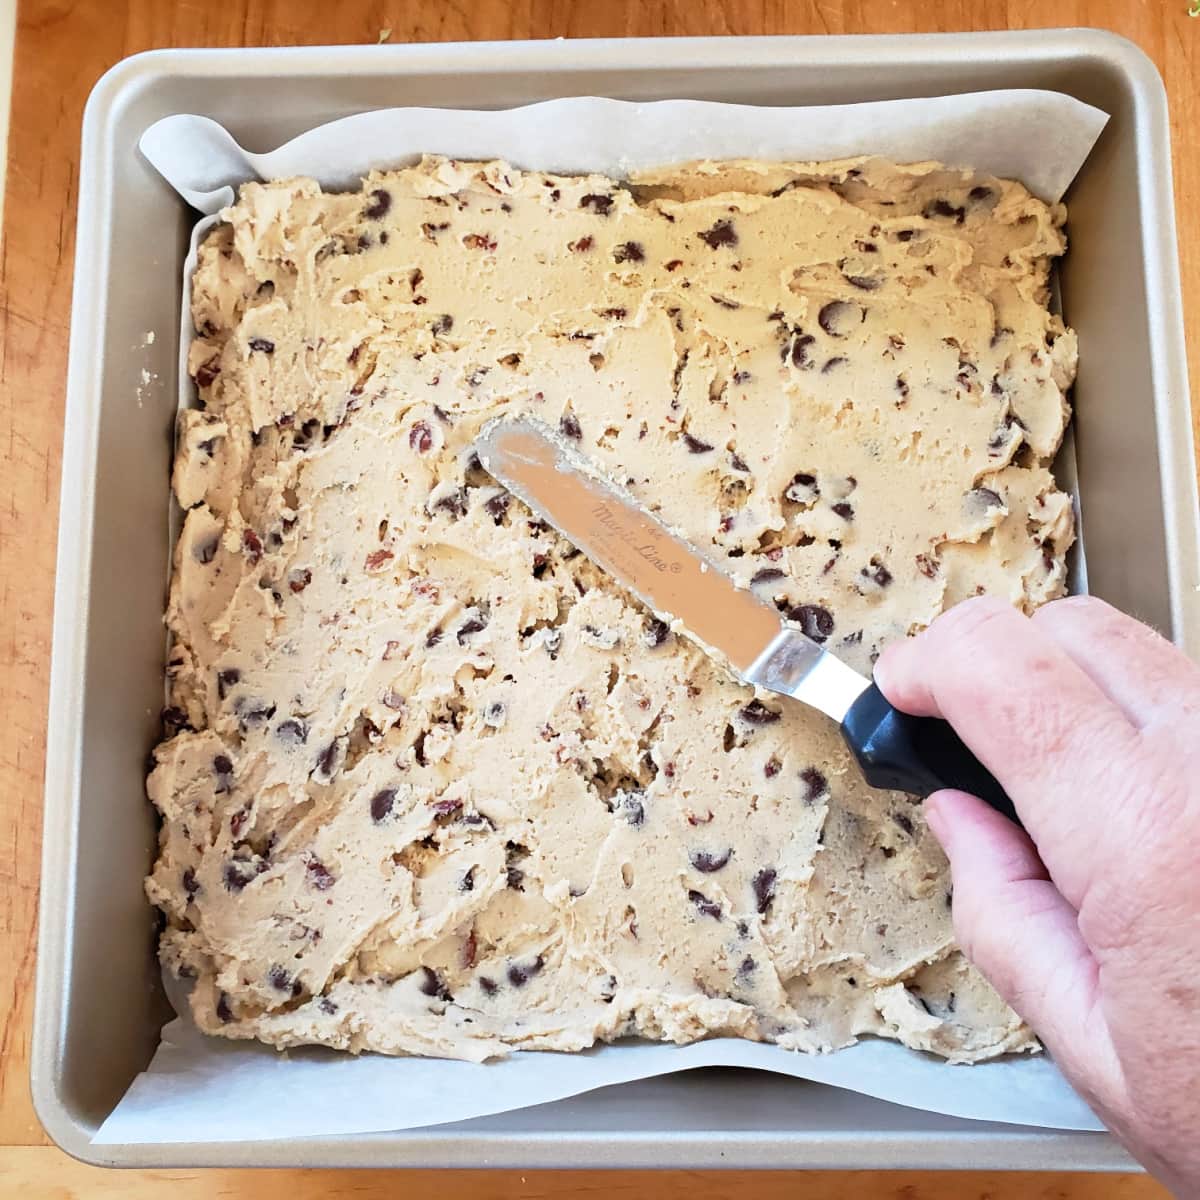 Hand holding an offset spatula spreads thick cookie dough in a gold toned baking pan